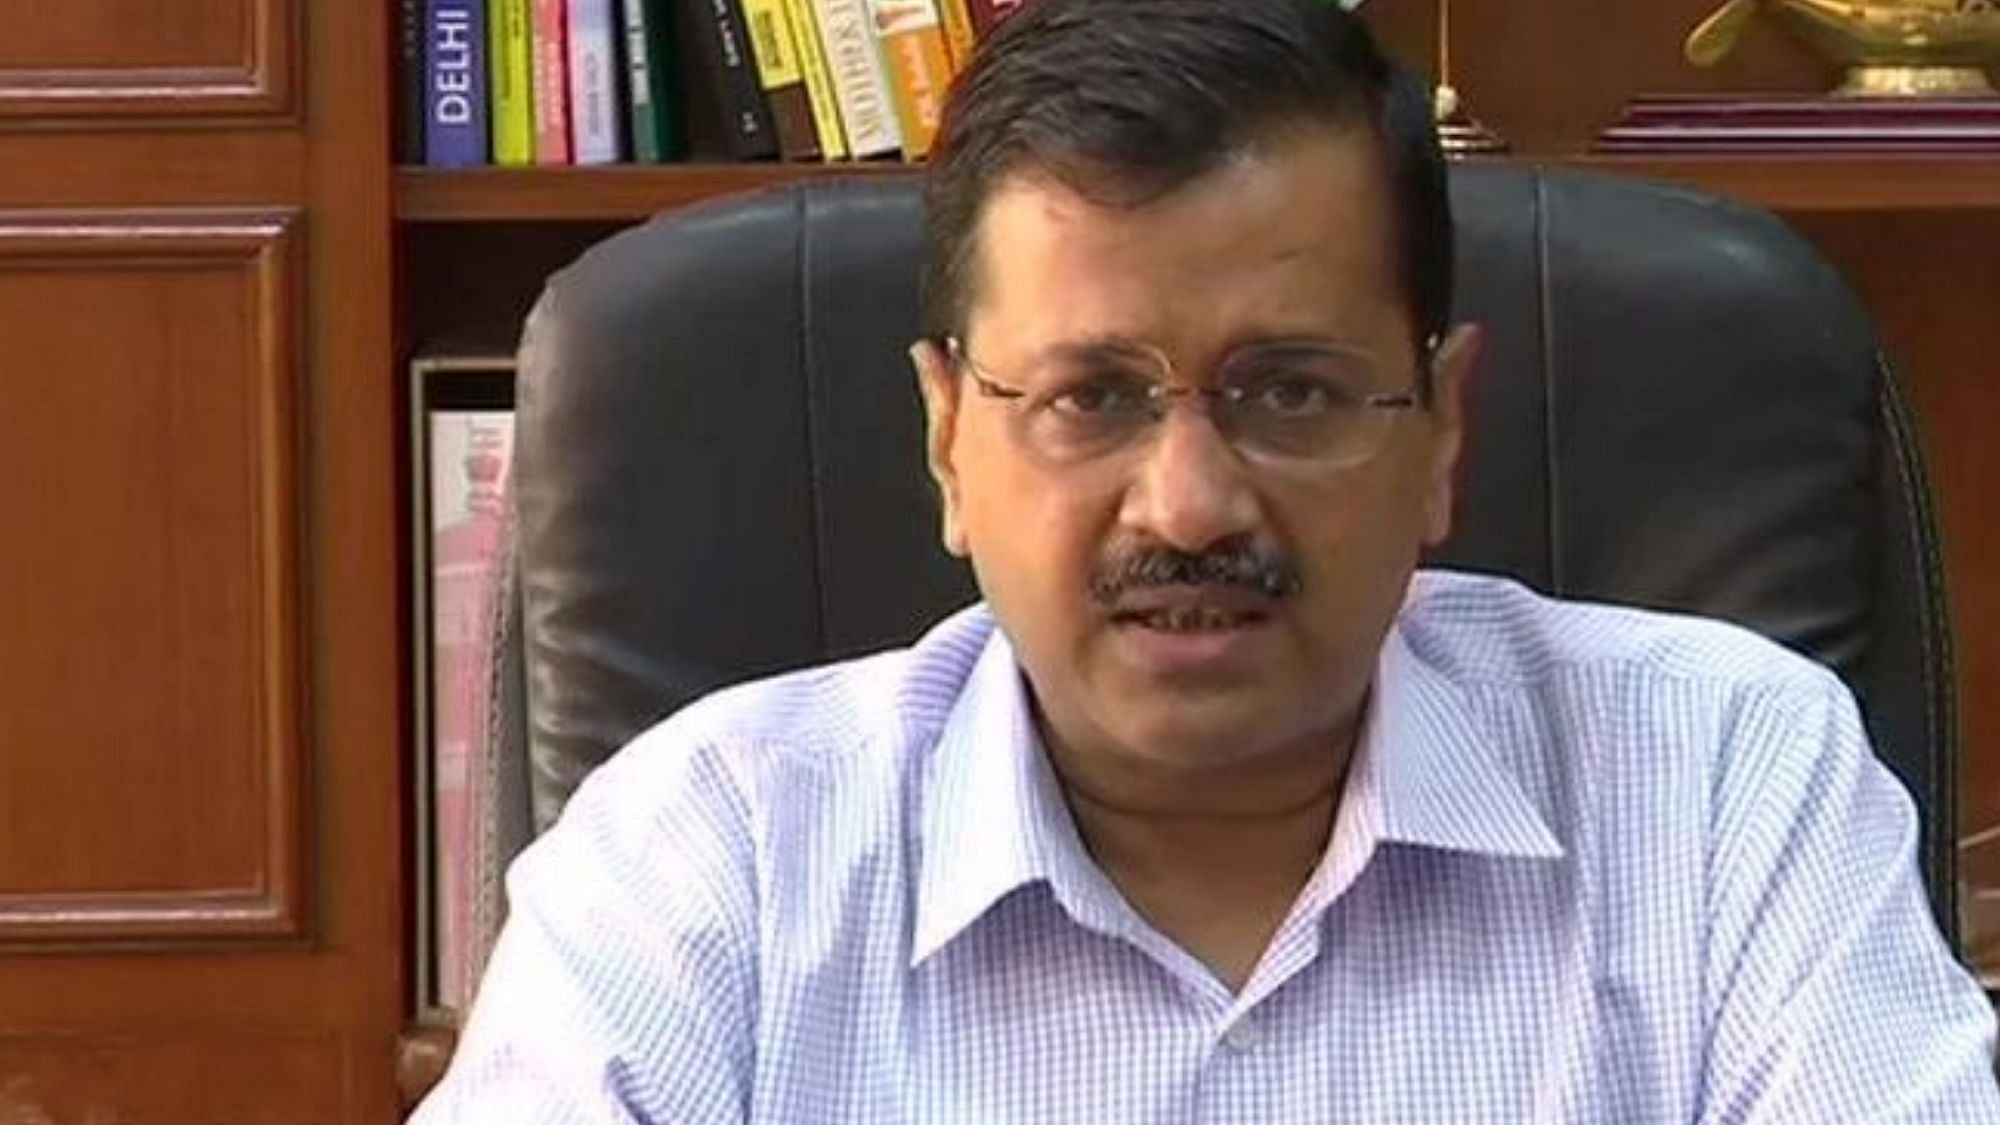  Addressing an online briefing, Kejriwal said it is a matter of concern that cases of COVID-19 are increasing in the national capital.